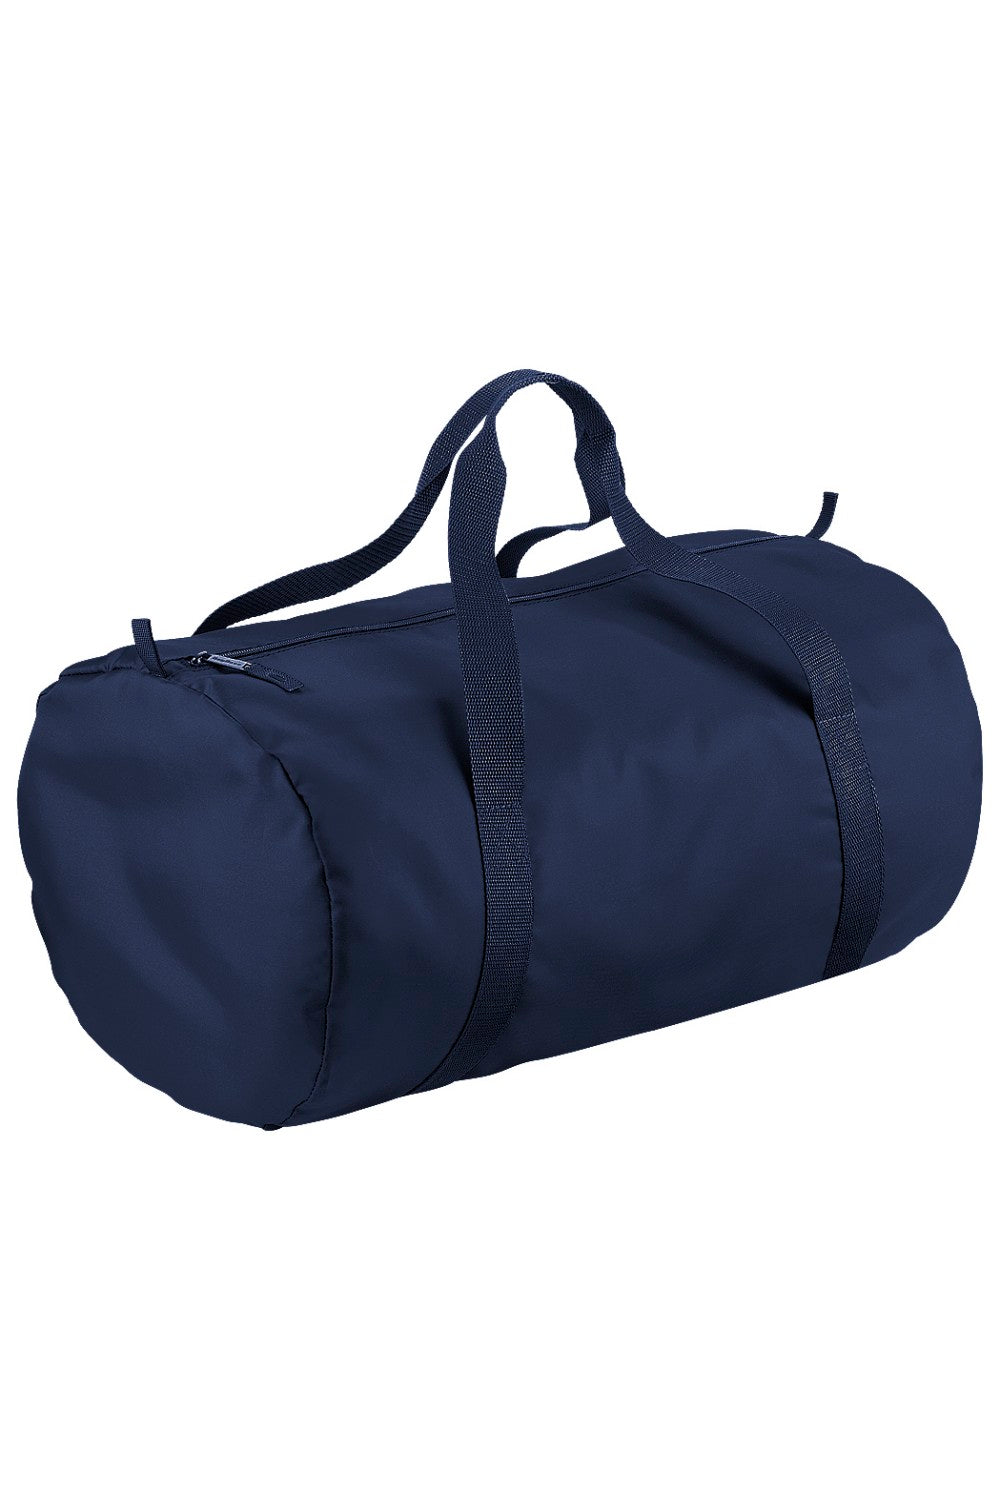 Packaway Barrel Bag/Duffel Water Resistant Travel Bag (8 Gallons) (Pack Of 2) - French Navy/French Navy